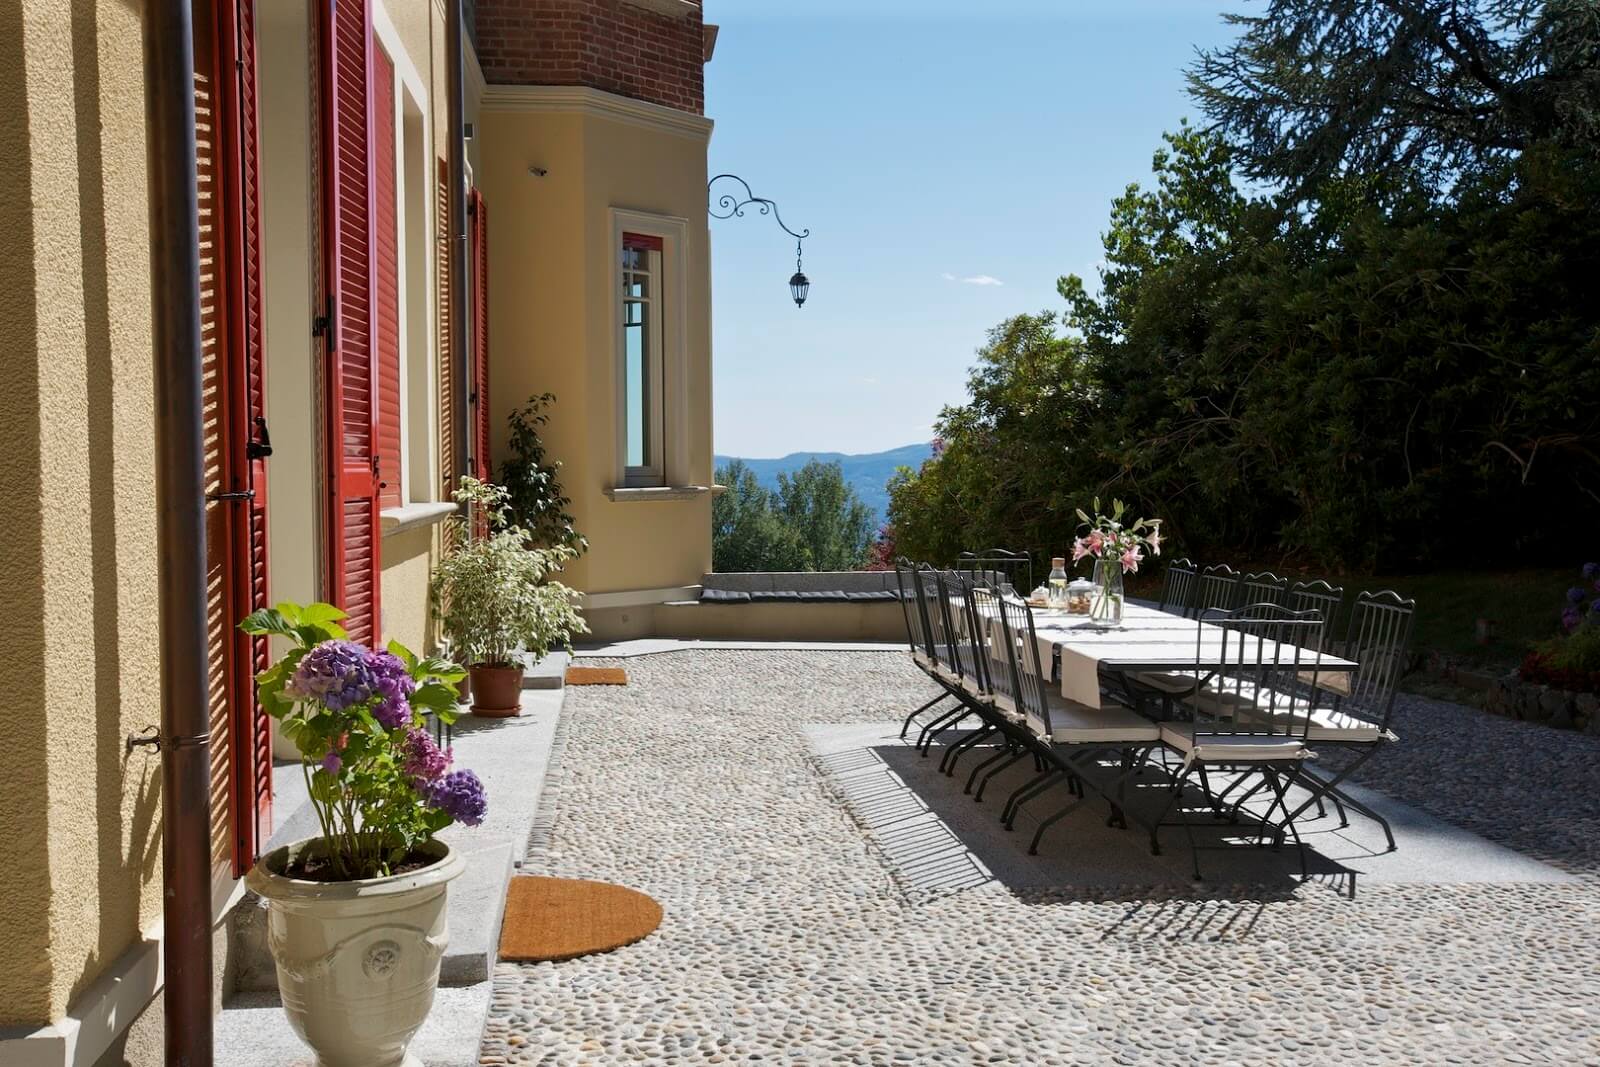 Villa Confalonieri is in one of the most beautiful locations